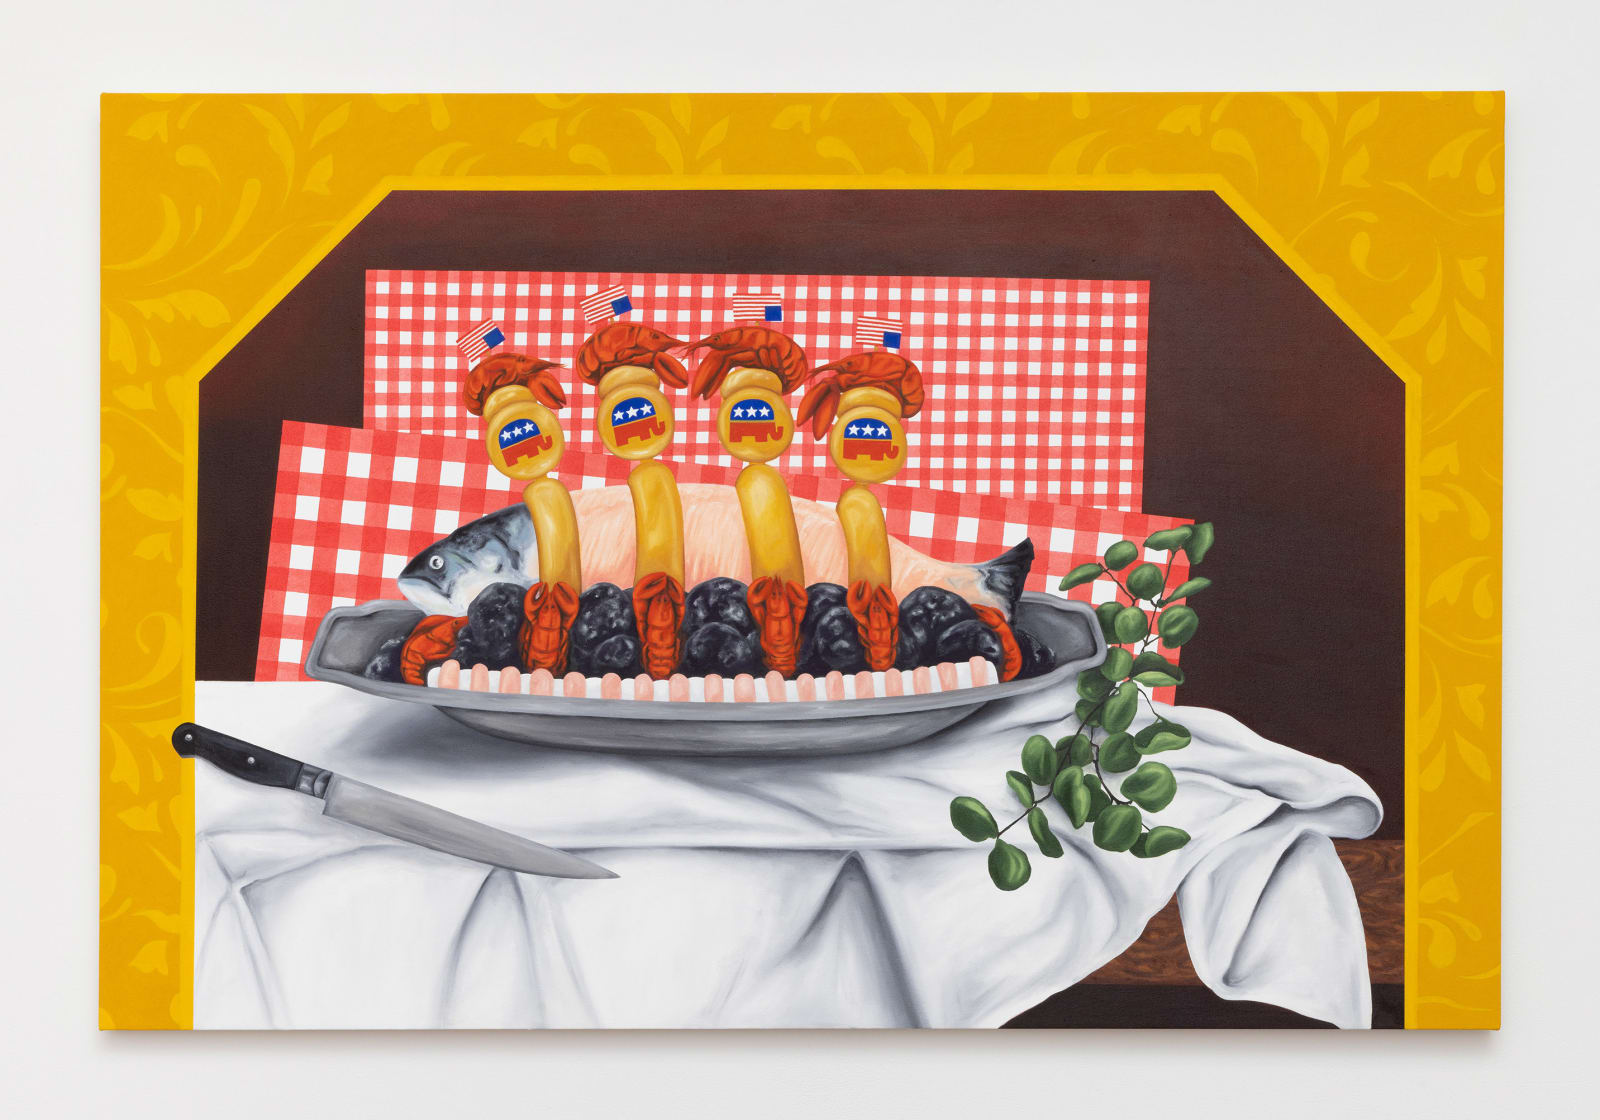 Painting featuring a plate of skinned fish between a knife and a eucalyptus branch on top of a table viewed through an ornated golden arch. The fish dish is decorated with lobsters, four golden republican elephant campaign pins.